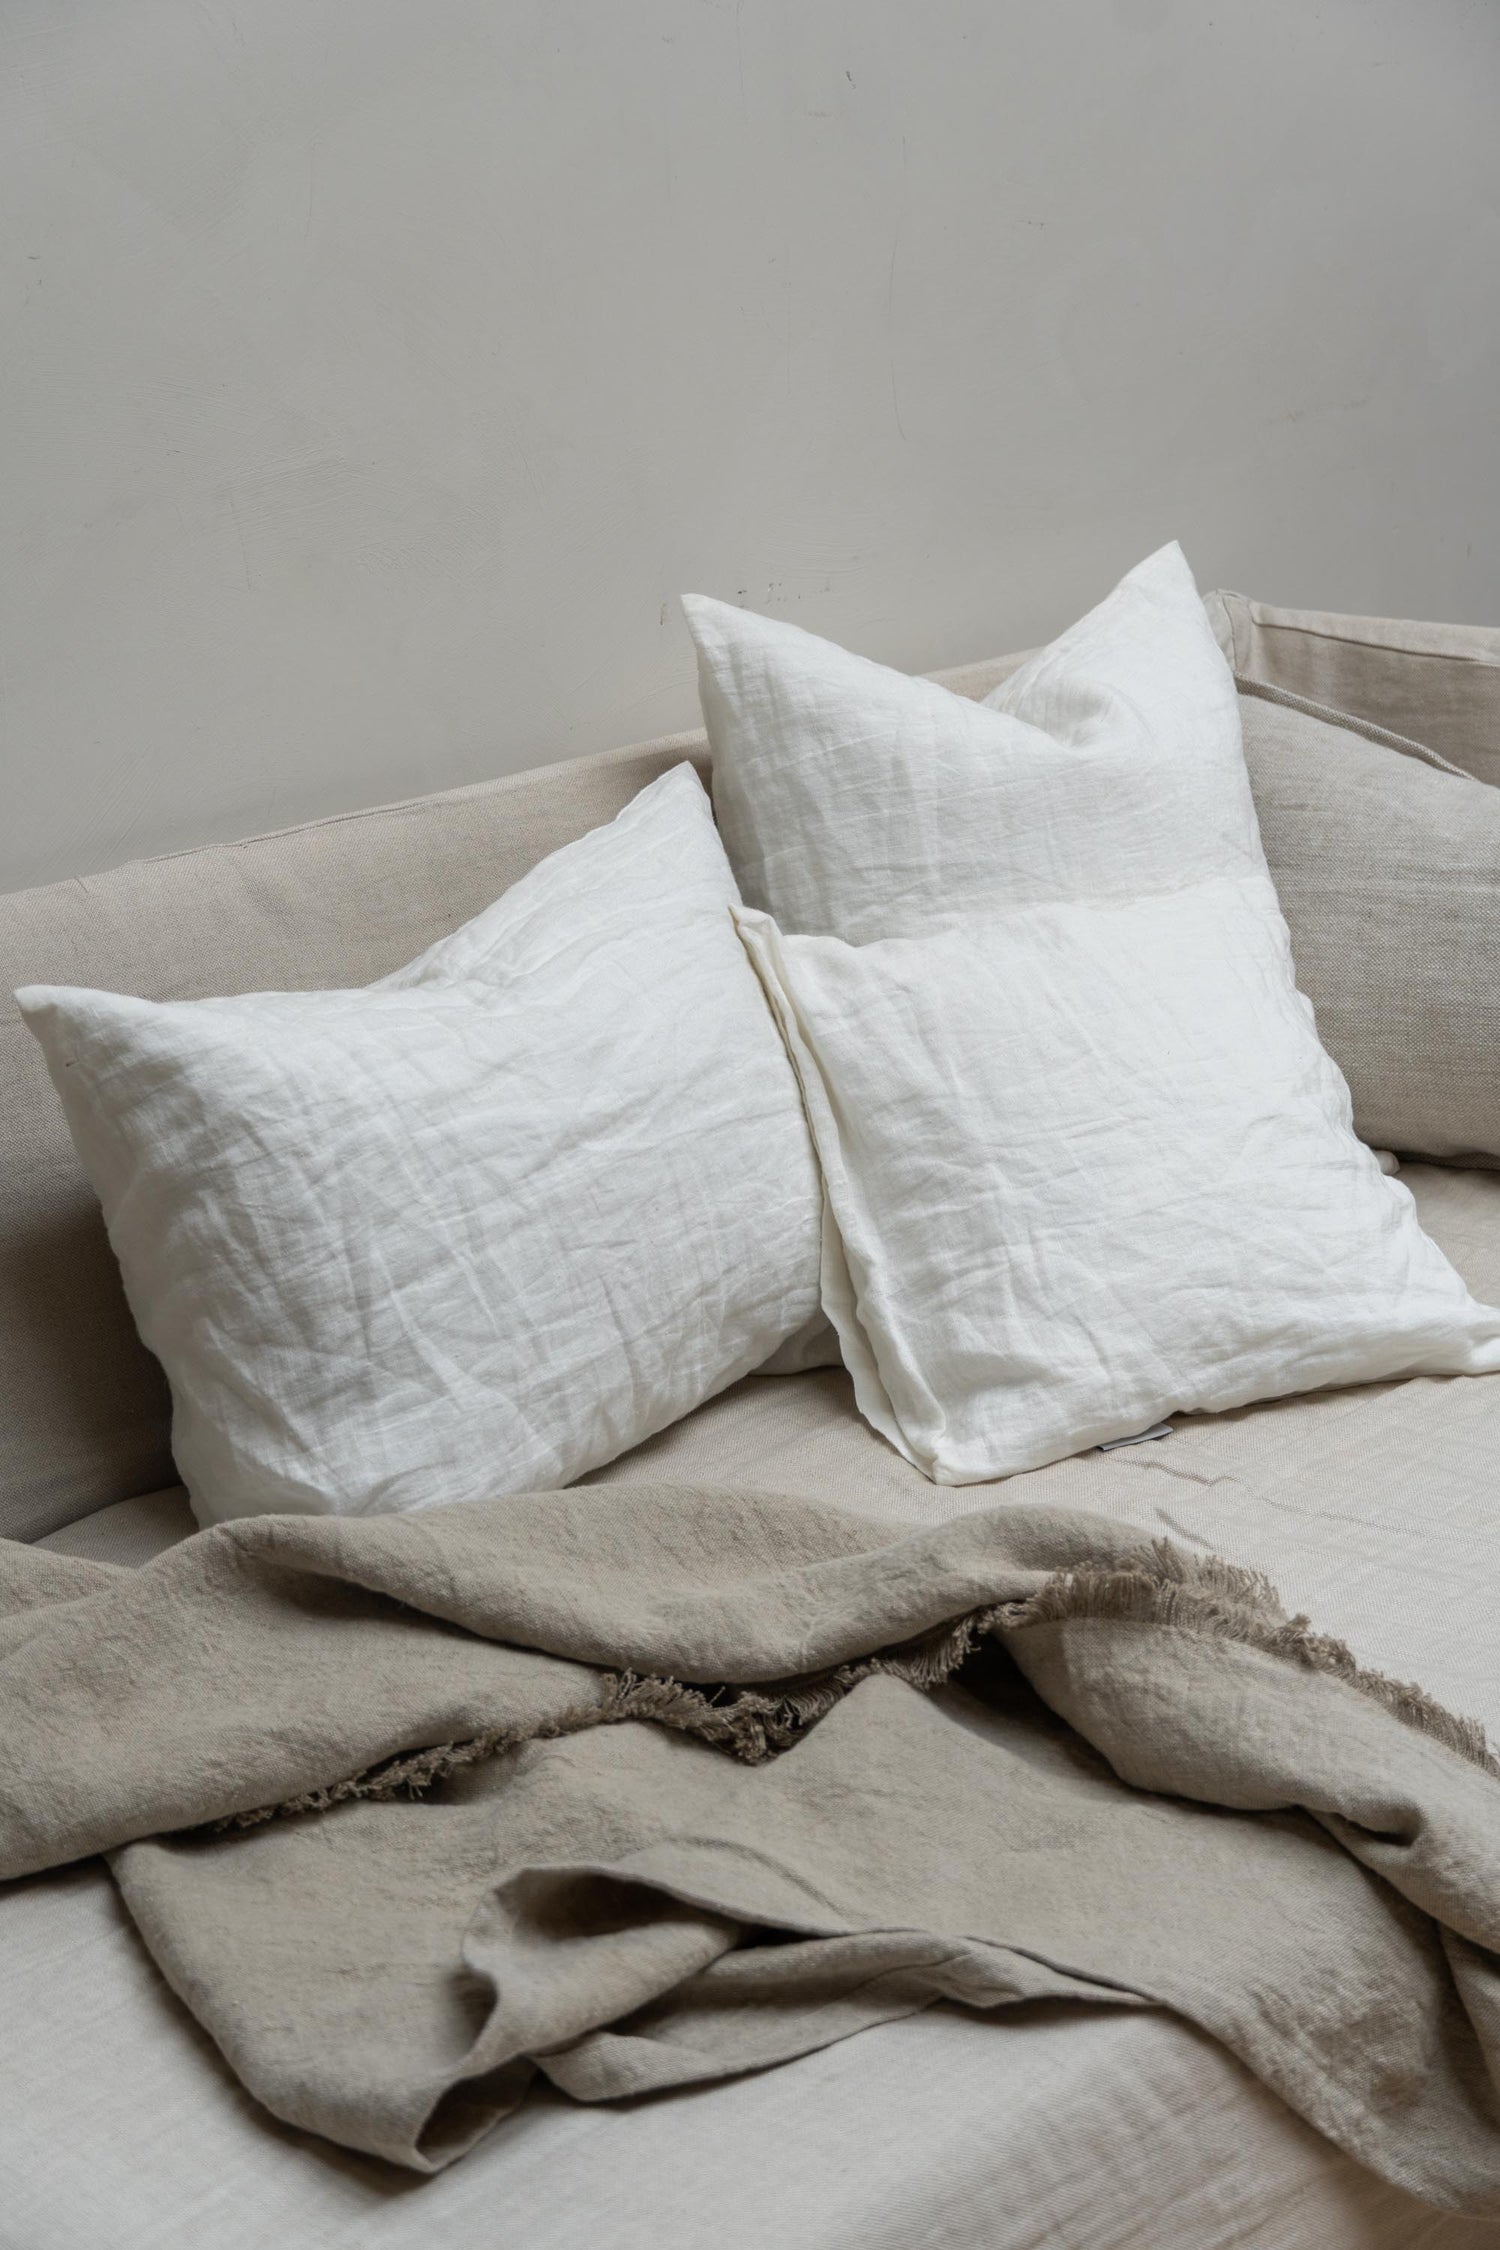 Linen Cushions by Timeless Linen in Off White set on couch with linen throw.